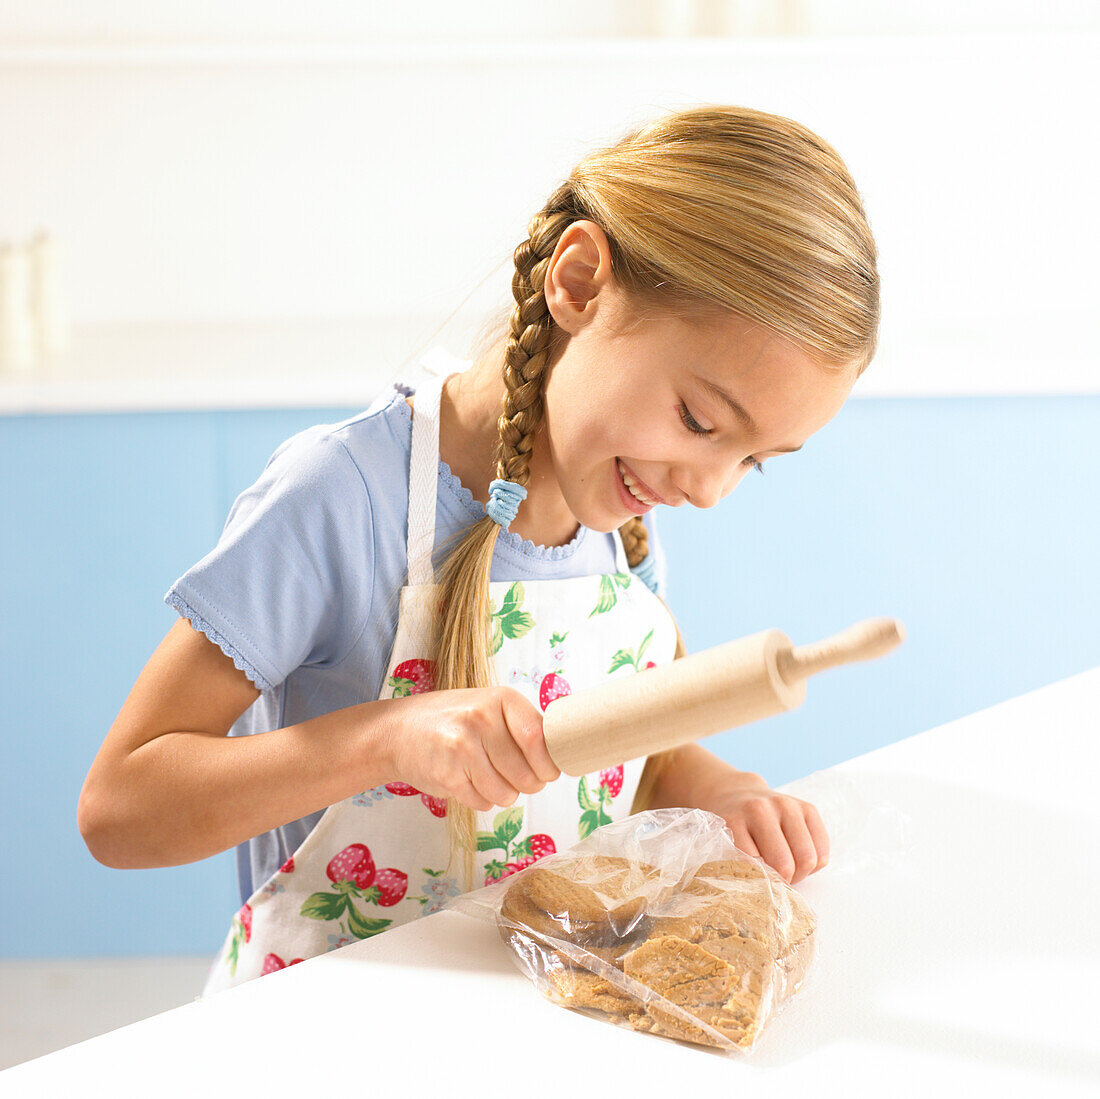 Girl crushing biscuits in a bag with a rolling pin